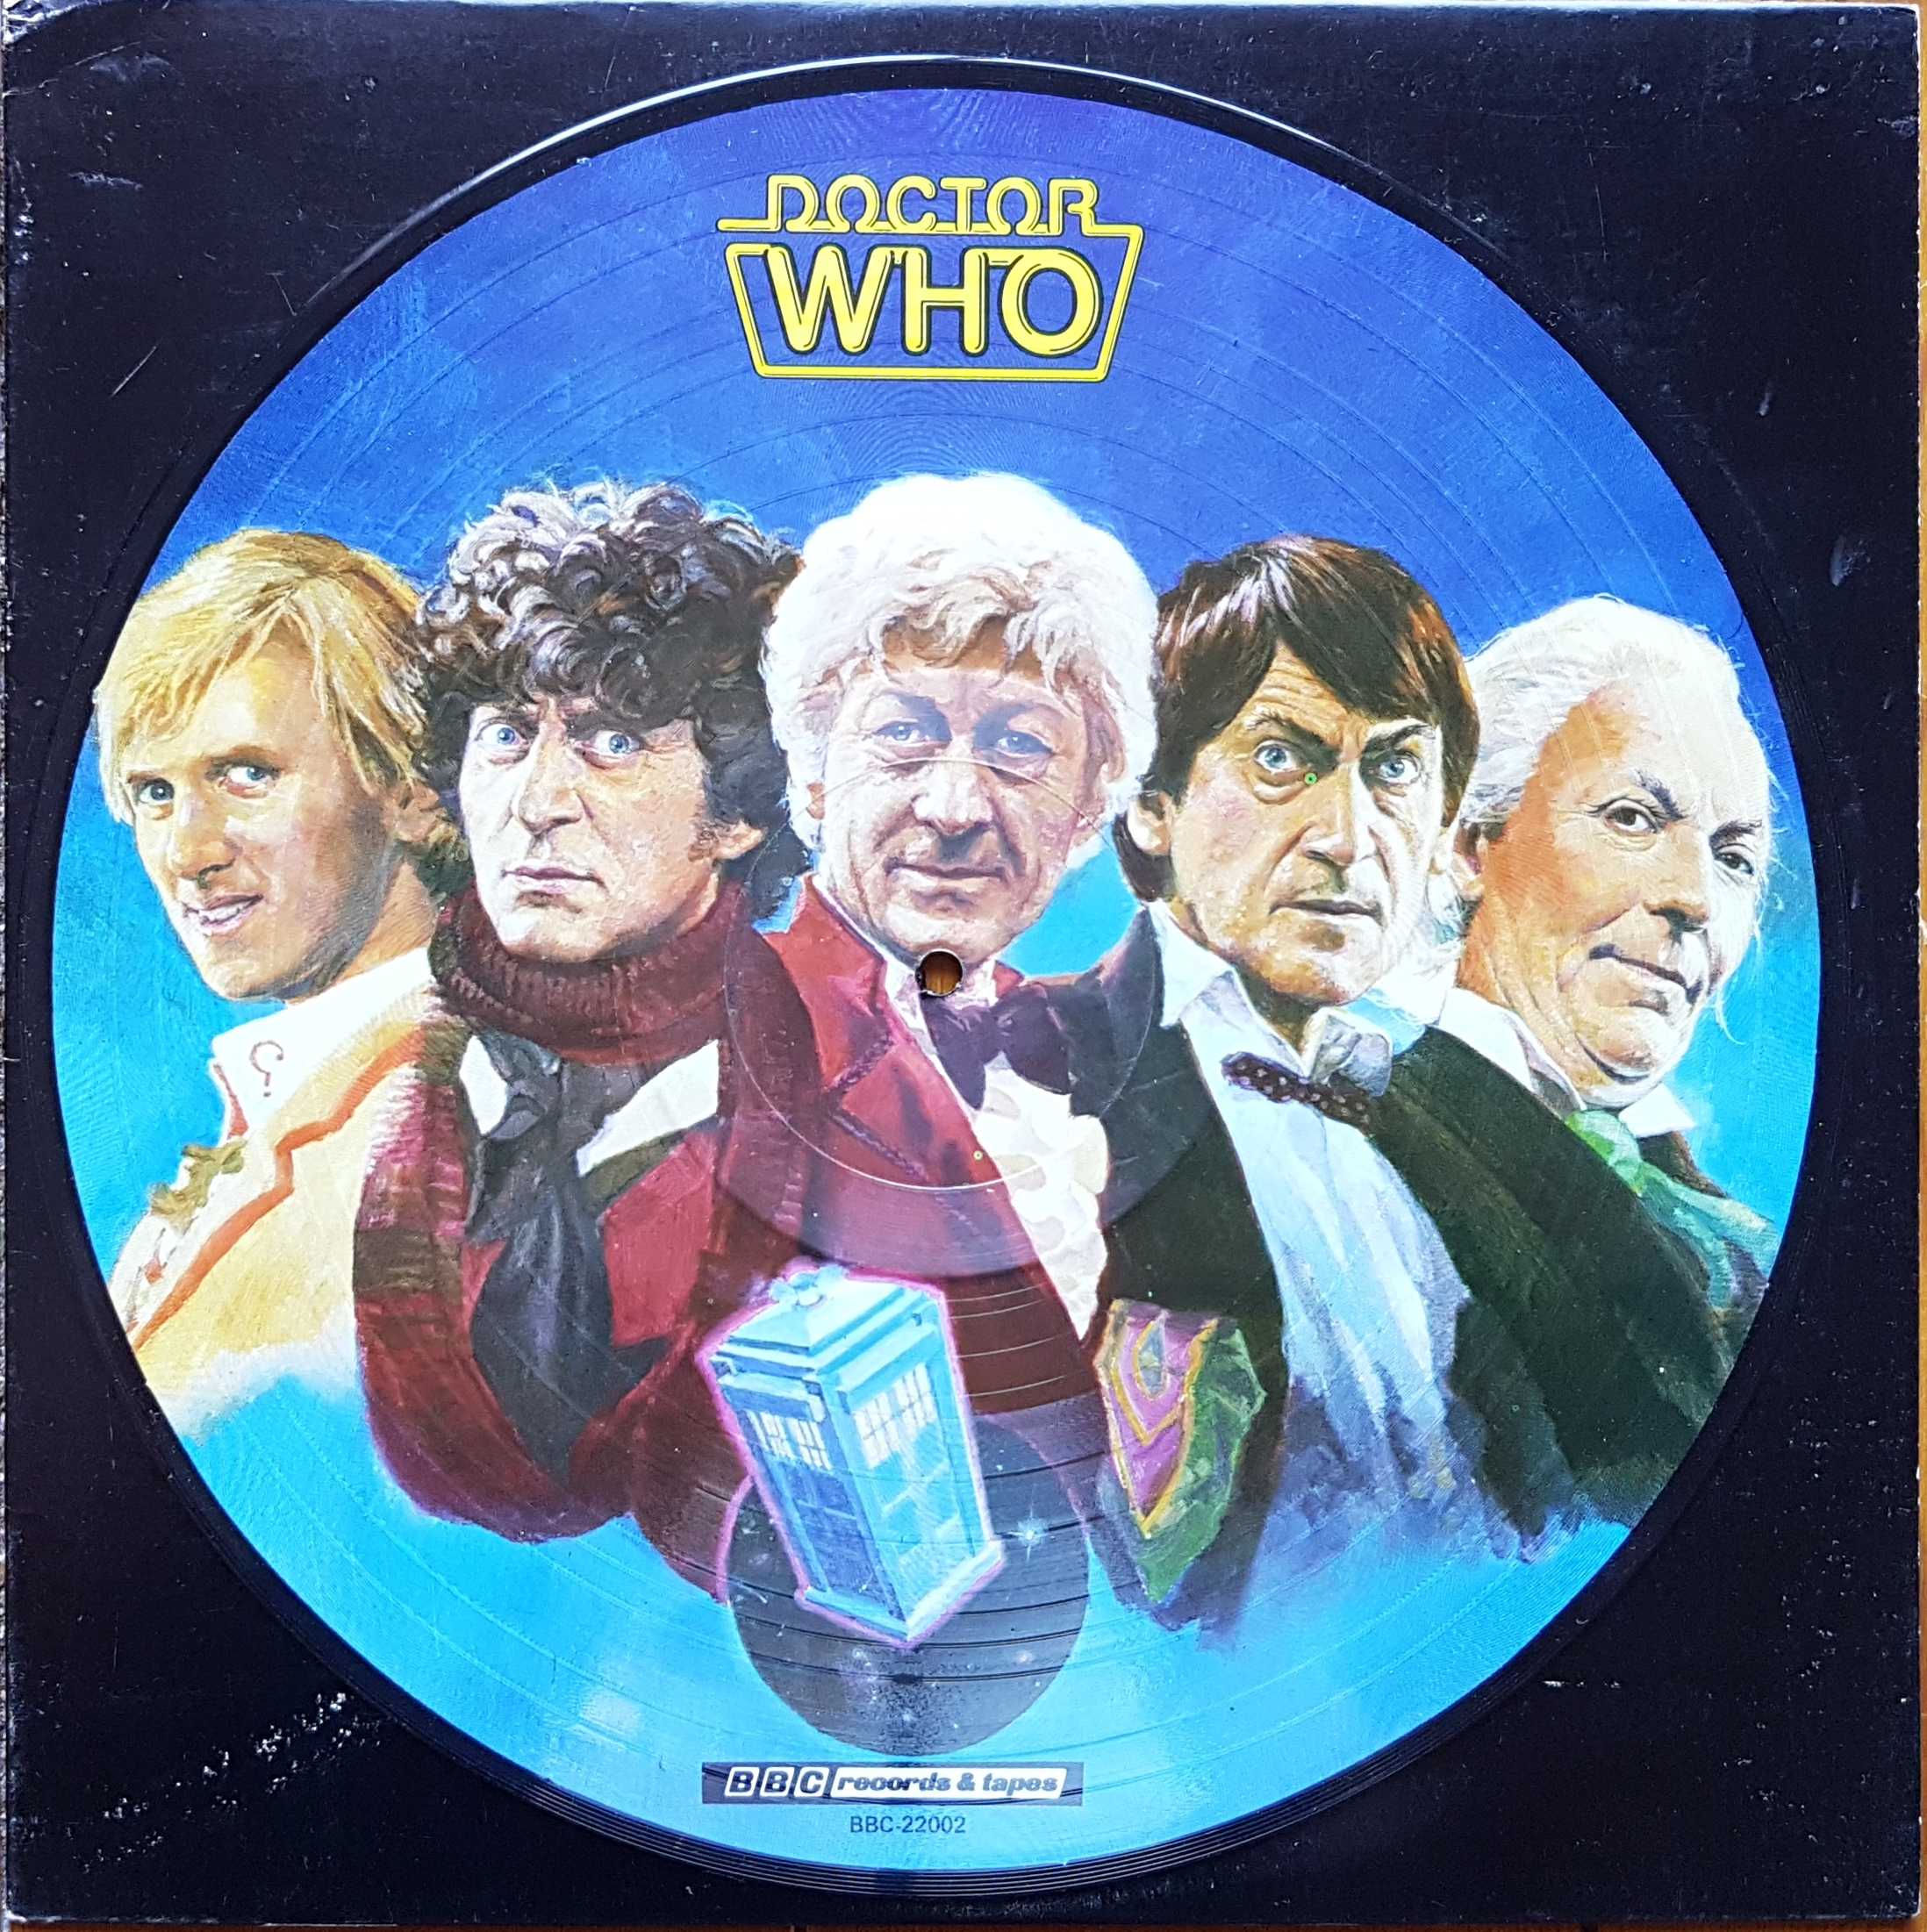 Picture of BBC - 22002 Doctor Who the music - Picture disc (US import) by artist Various from the BBC albums - Records and Tapes library